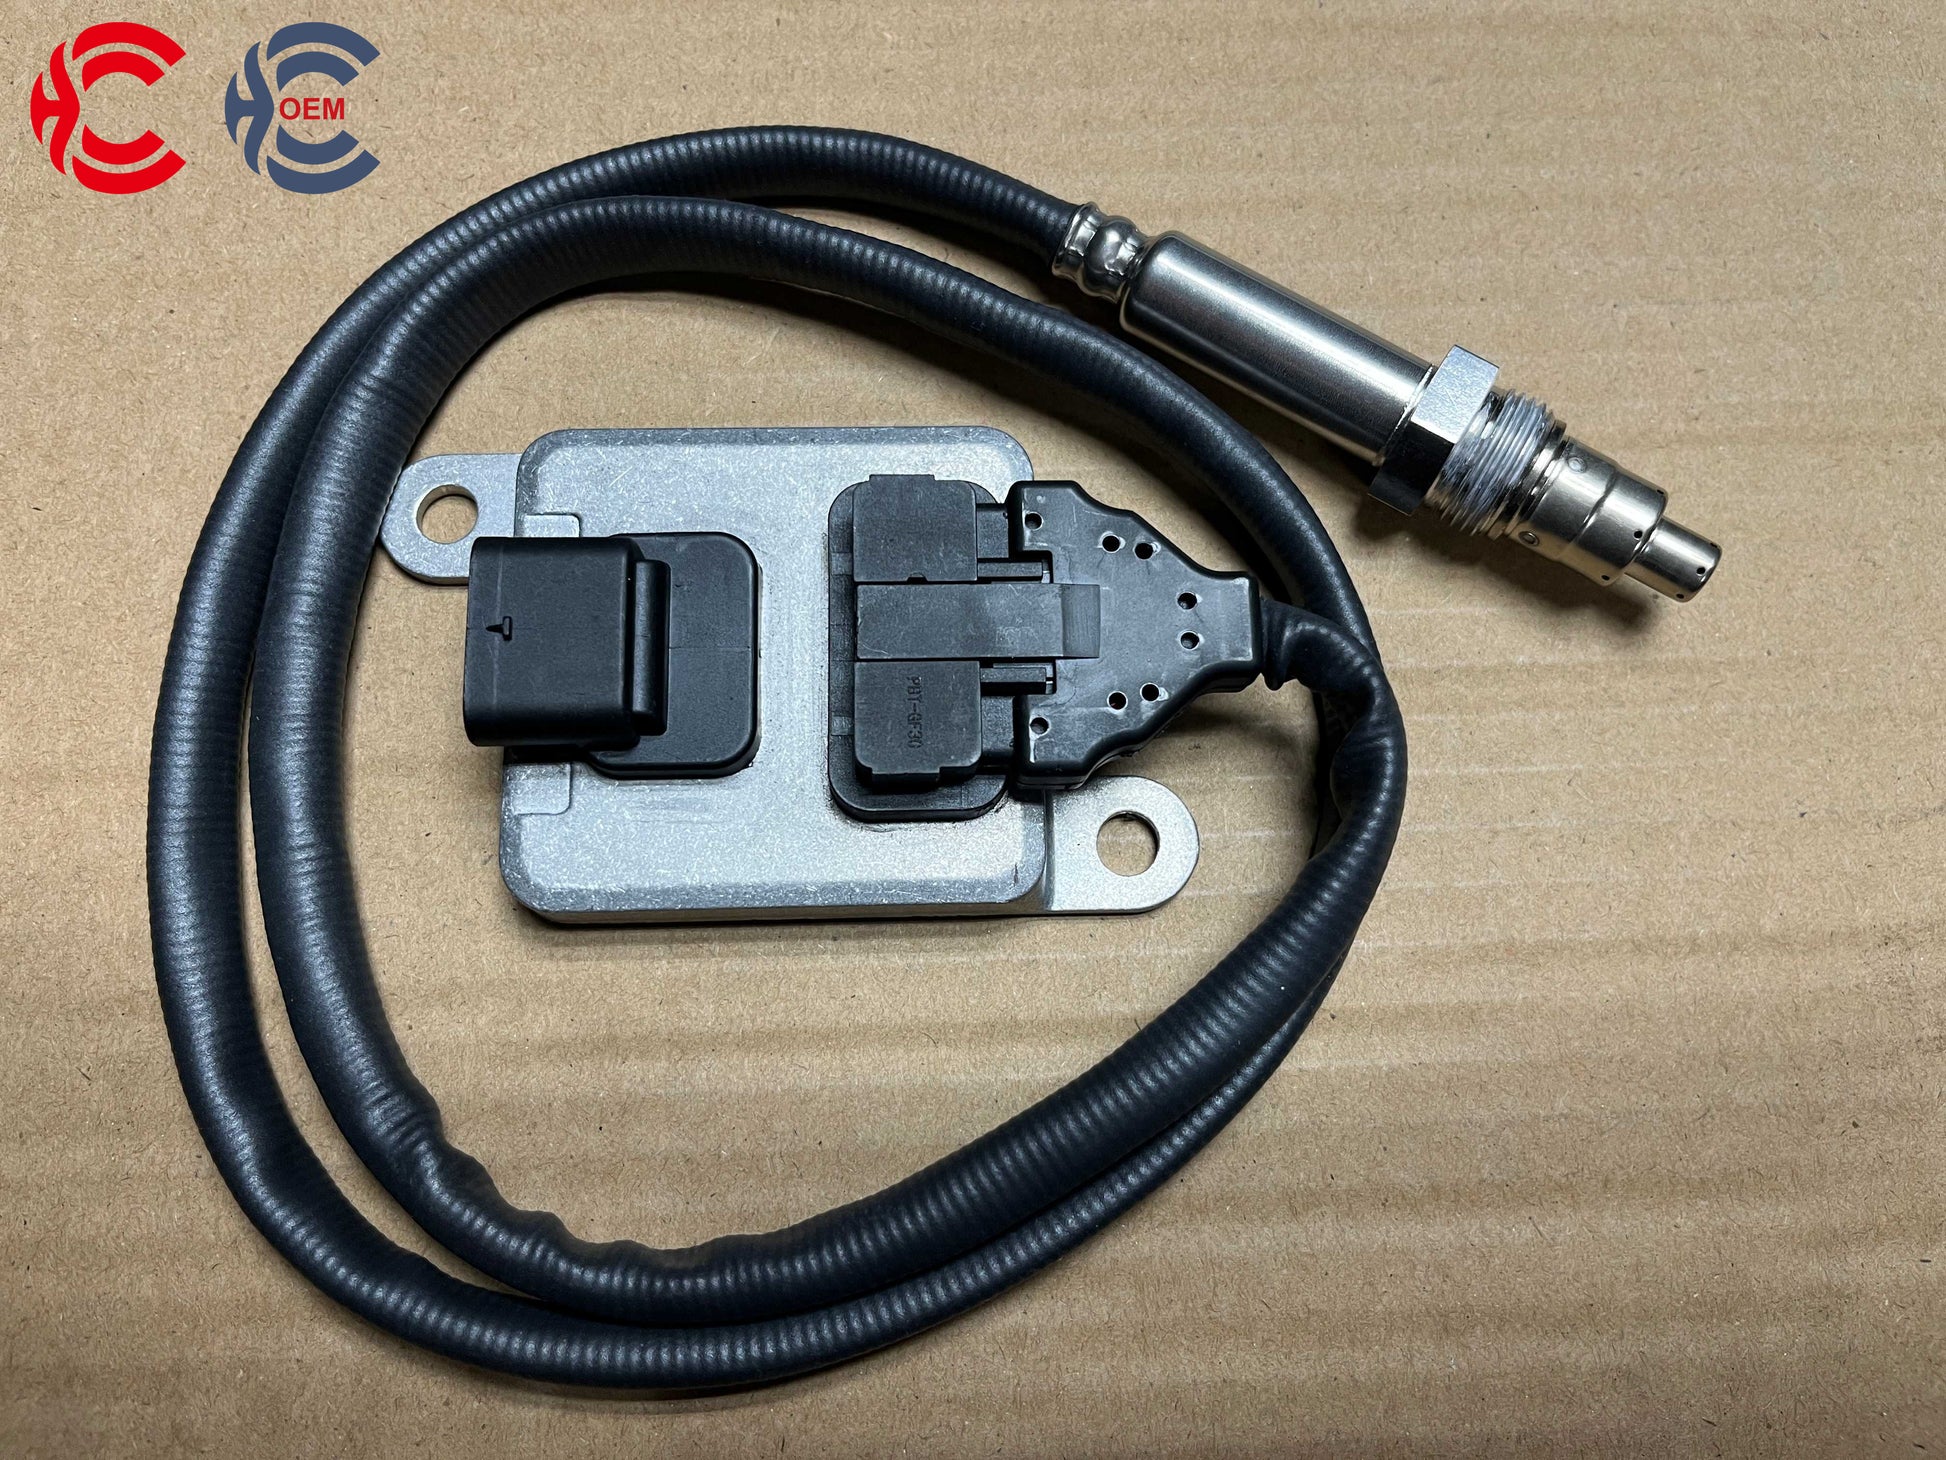 OEM: 89823-13912Material: ABS metalColor: black silverOrigin: Made in ChinaWeight: 400gPacking List: 1* Nitrogen oxide sensor NOx More ServiceWe can provide OEM Manufacturing serviceWe can Be your one-step solution for Auto PartsWe can provide technical scheme for you Feel Free to Contact Us, We will get back to you as soon as possible.